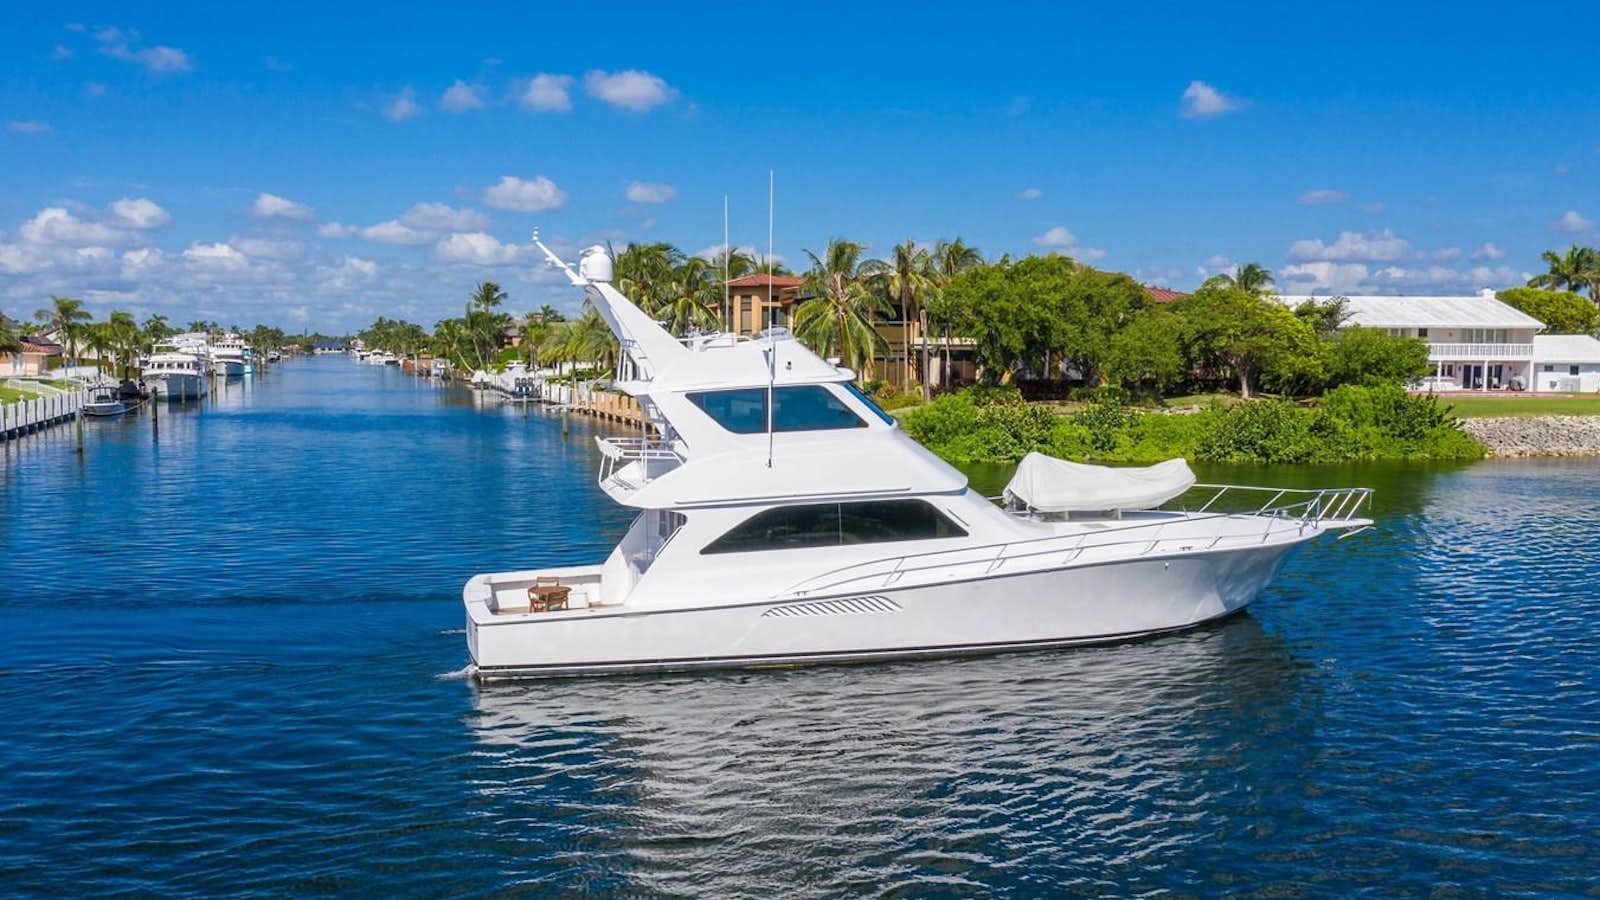 GOOD TO GO Yacht for Sale in united states, 61' (18.59m) 2002 VIKING